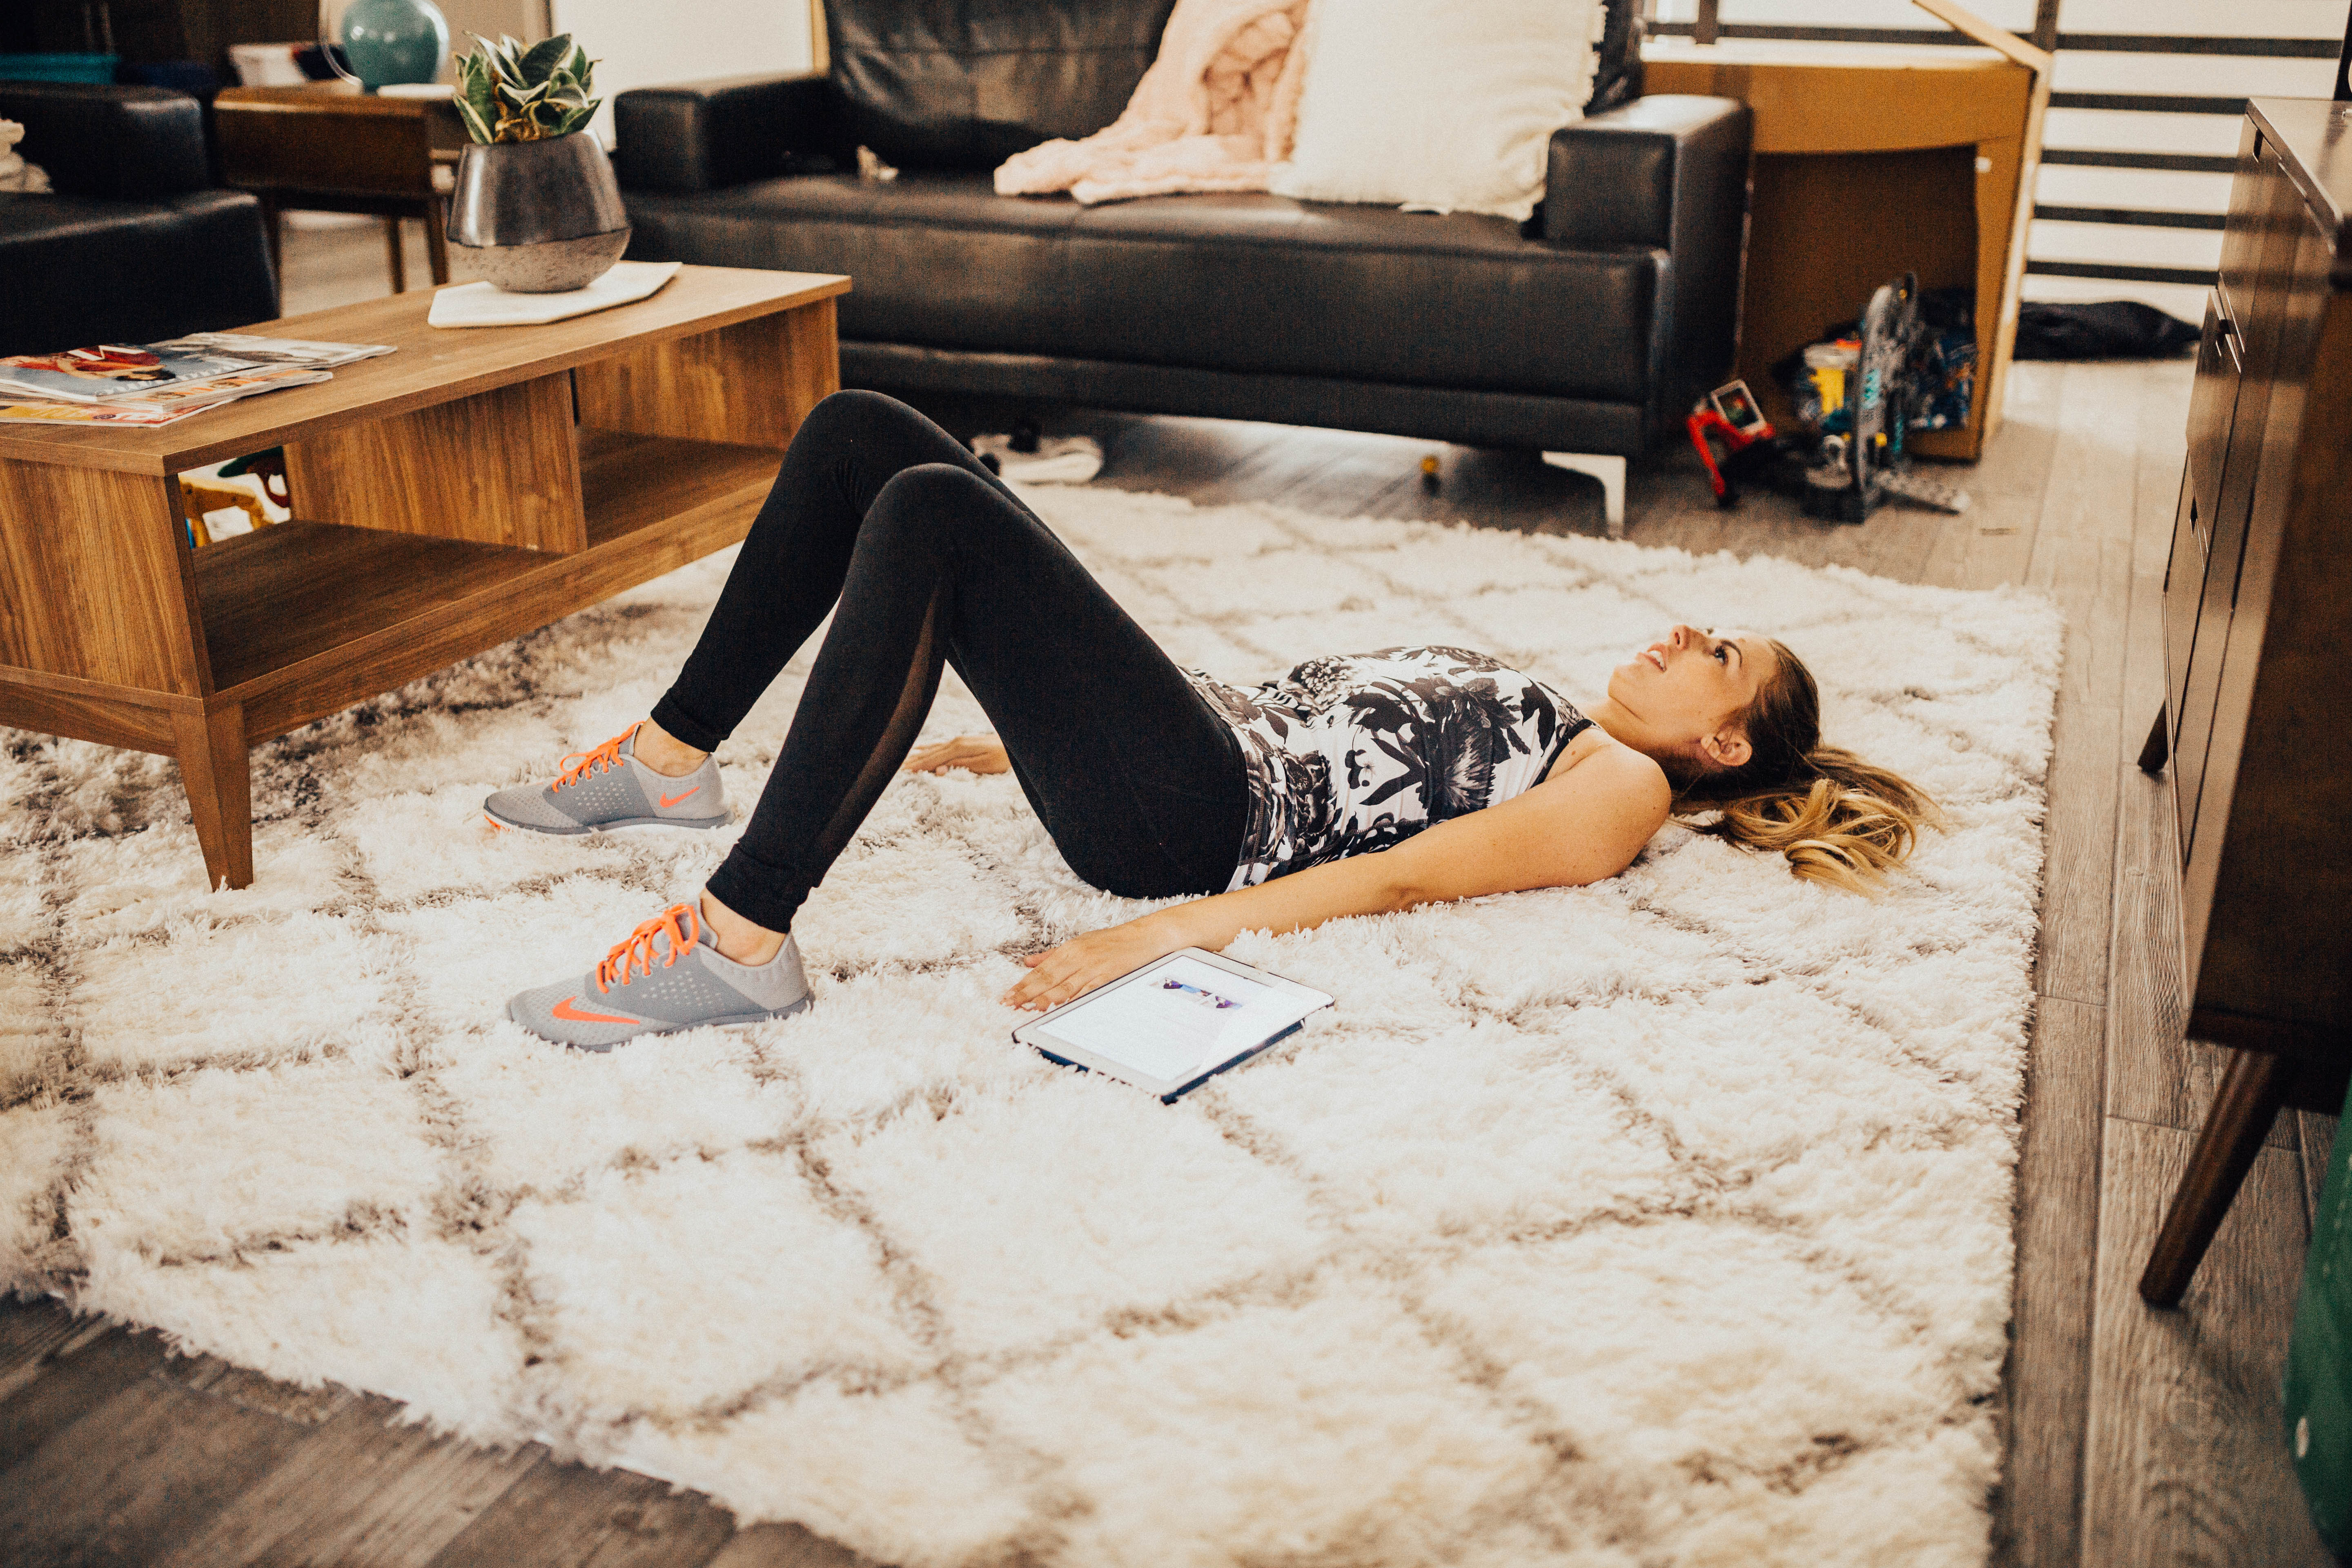 Getting My Body Back After King: The Ultimate Abs, Core & Pelvic Floor Workout by Utah blogger Dani Marie Blog